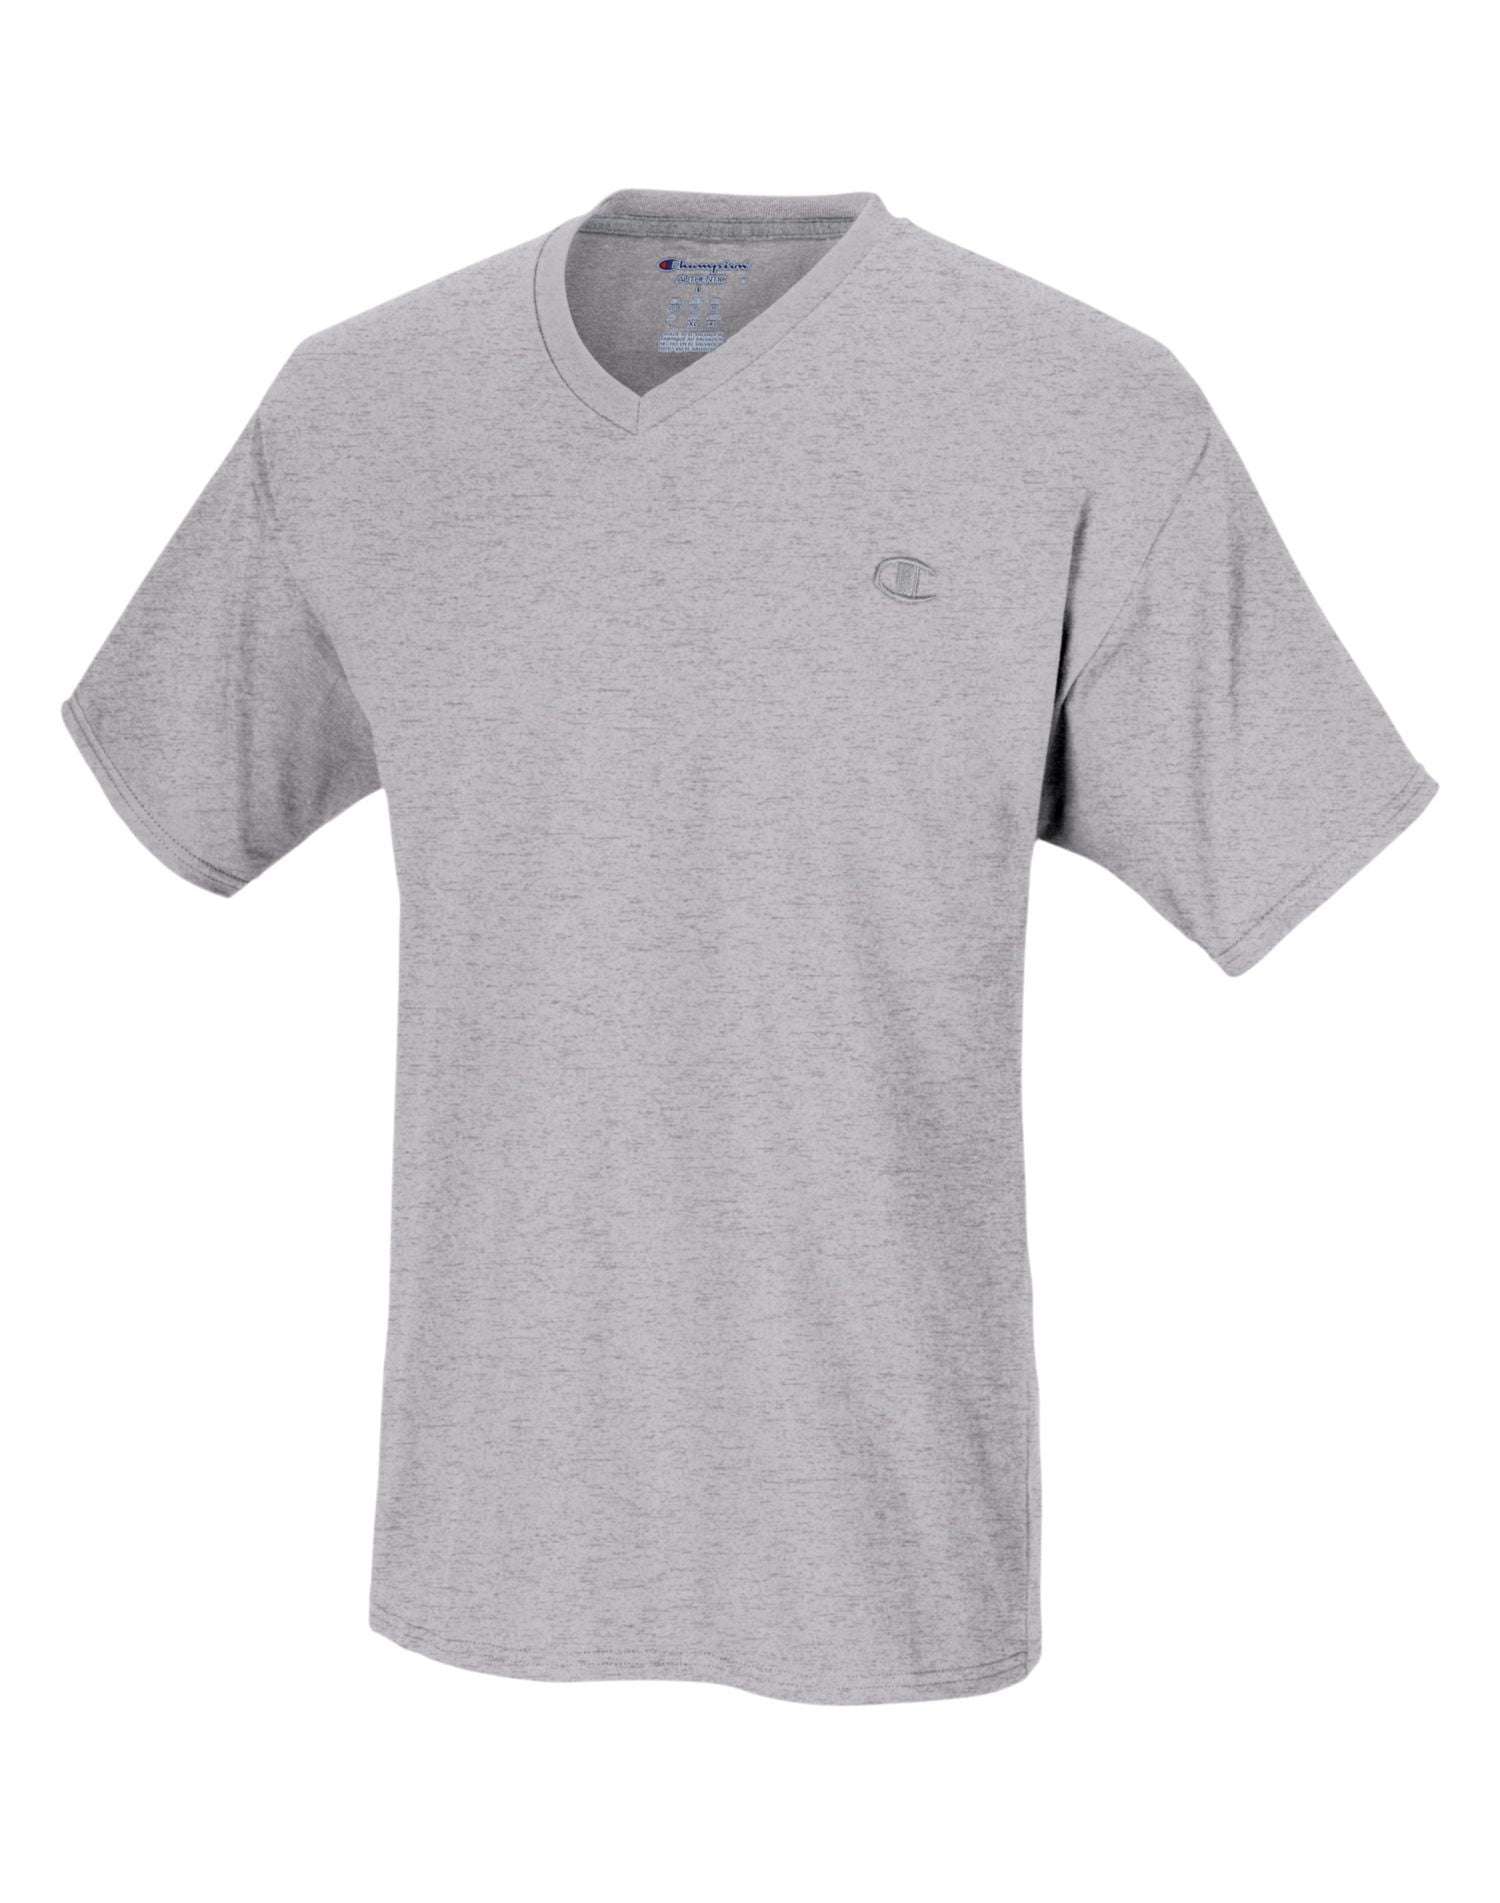 champion authentic athletic wear shirts